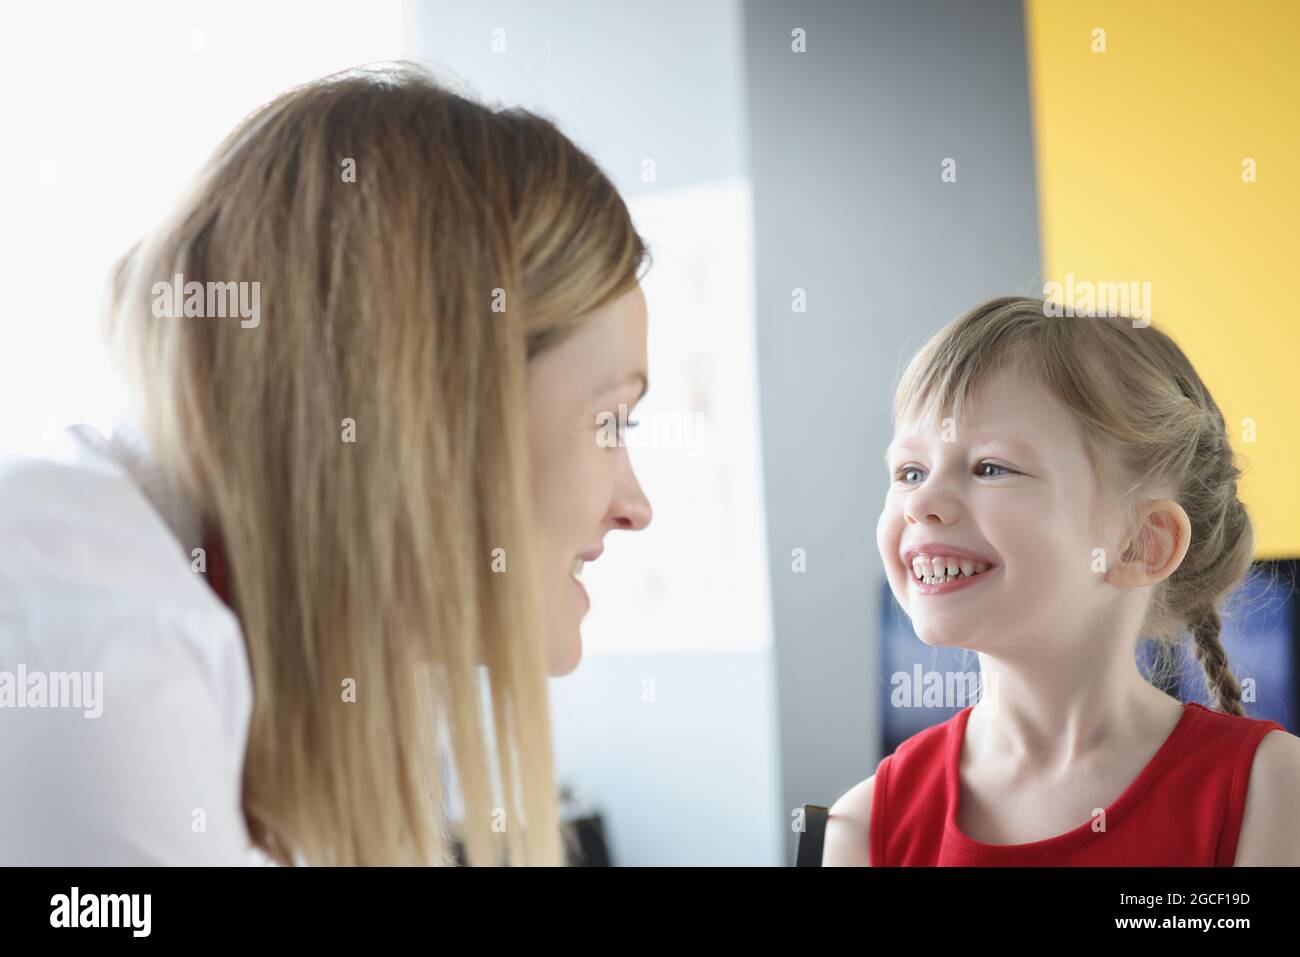 Woman speech therapist is engaged in speech with little girl Stock Photo